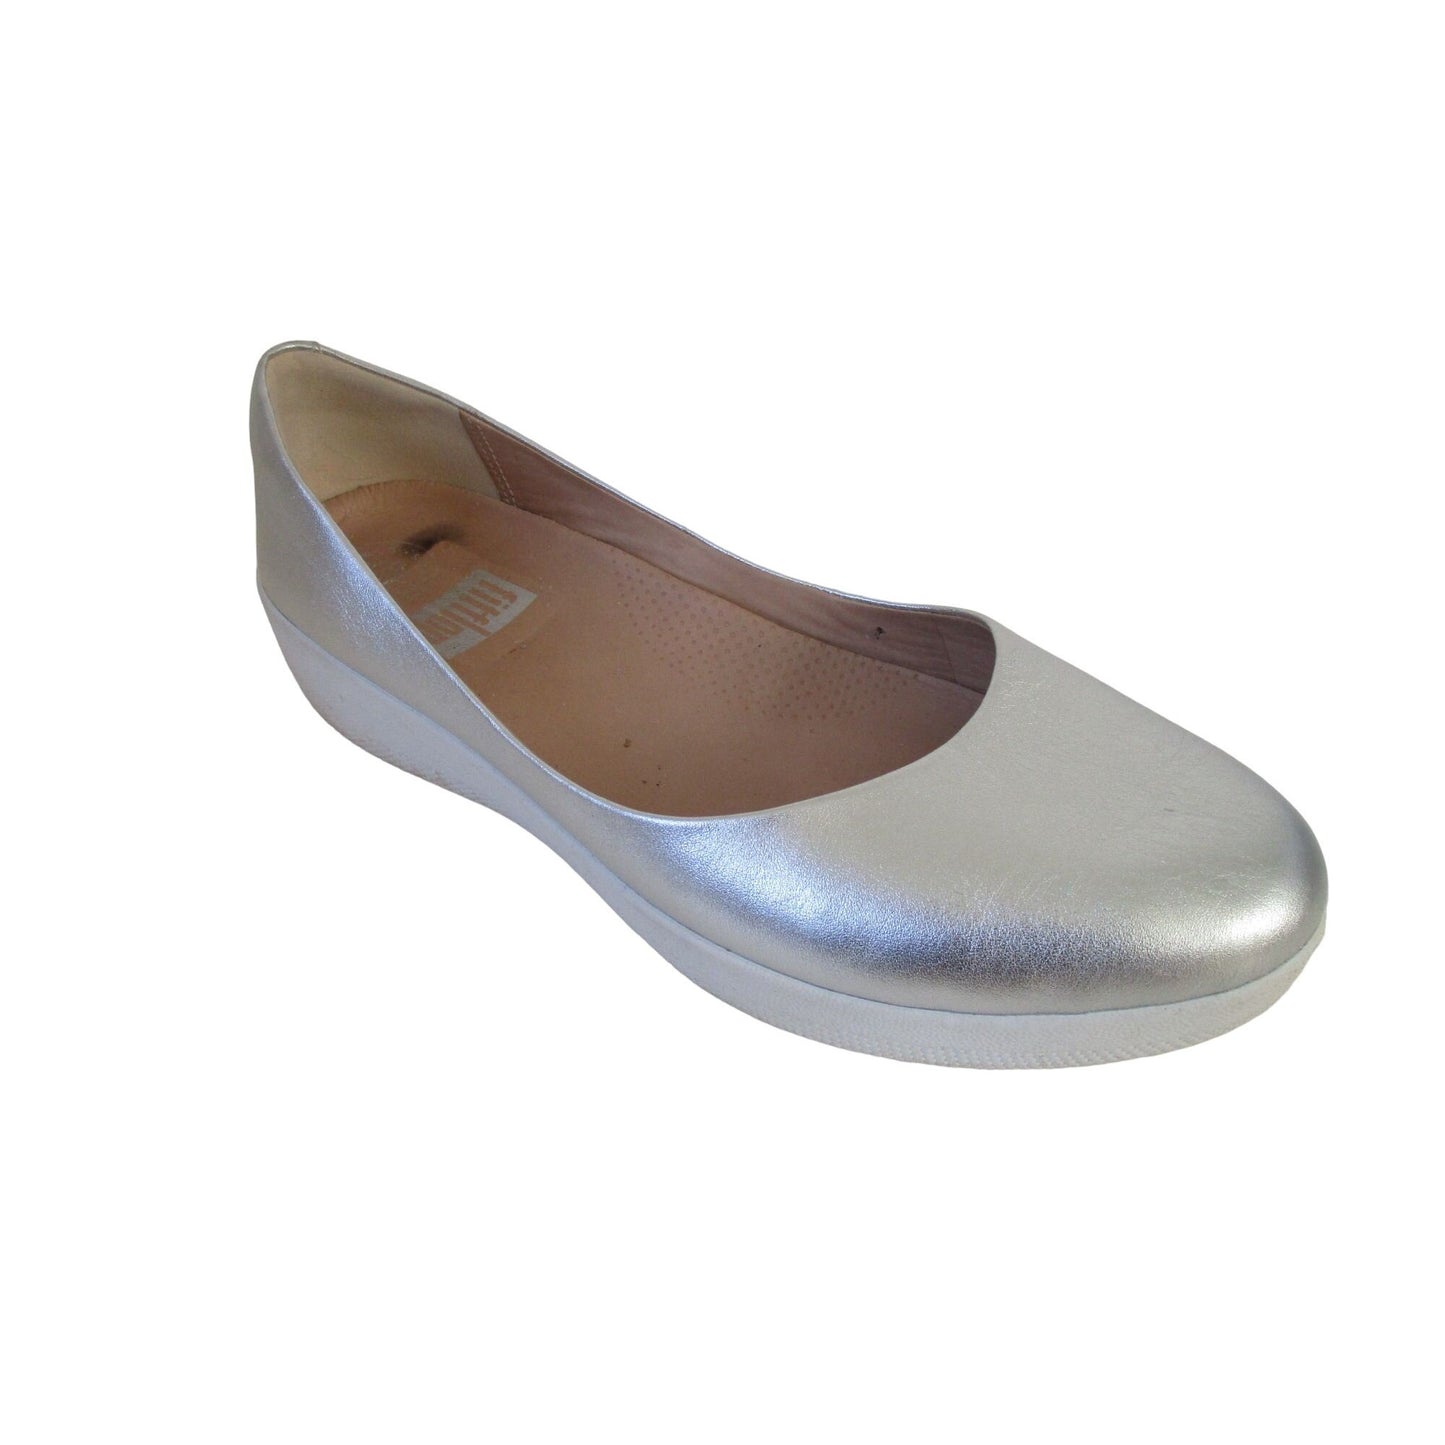 FitFlop silver leather, size 7, flats with white rubber soles